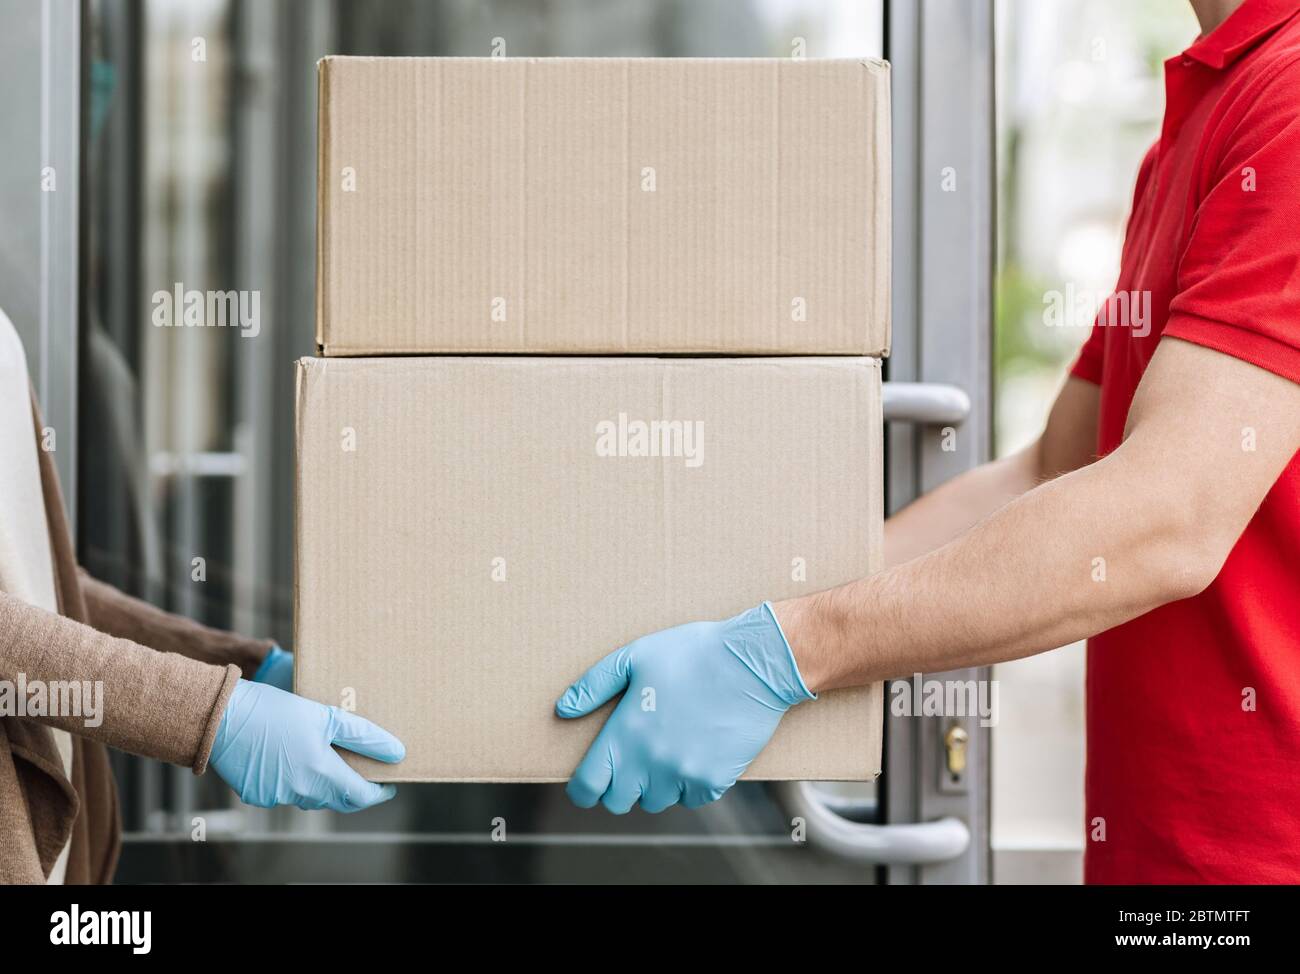 Online shopping and delivery to door concept. Courier delivers parcel to house during pandemic Stock Photo